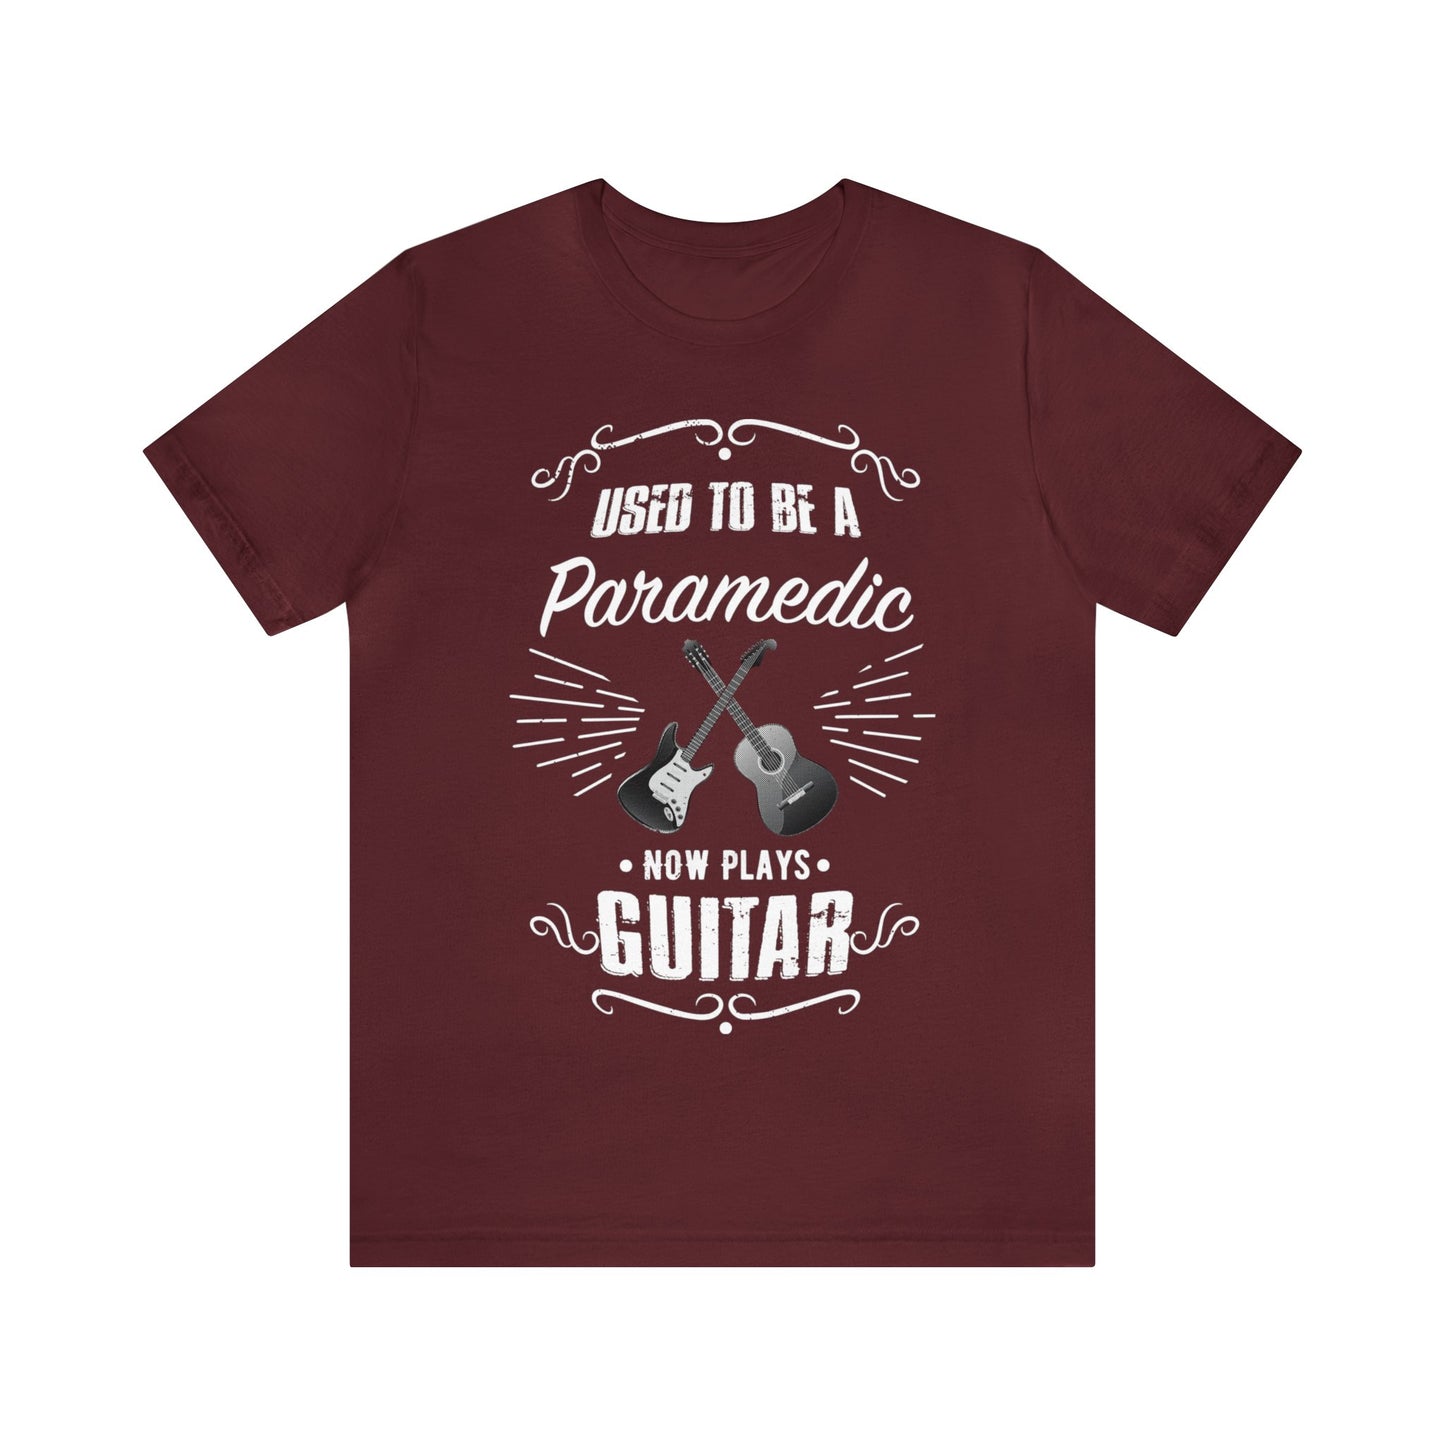 Used to be a PARAMEDIC; Now Plays GUITAR - Funny Retirement Gift, Unisex T-shirt Bella+Canvas 3001, dark shirt colors for amateur musician/guitar player